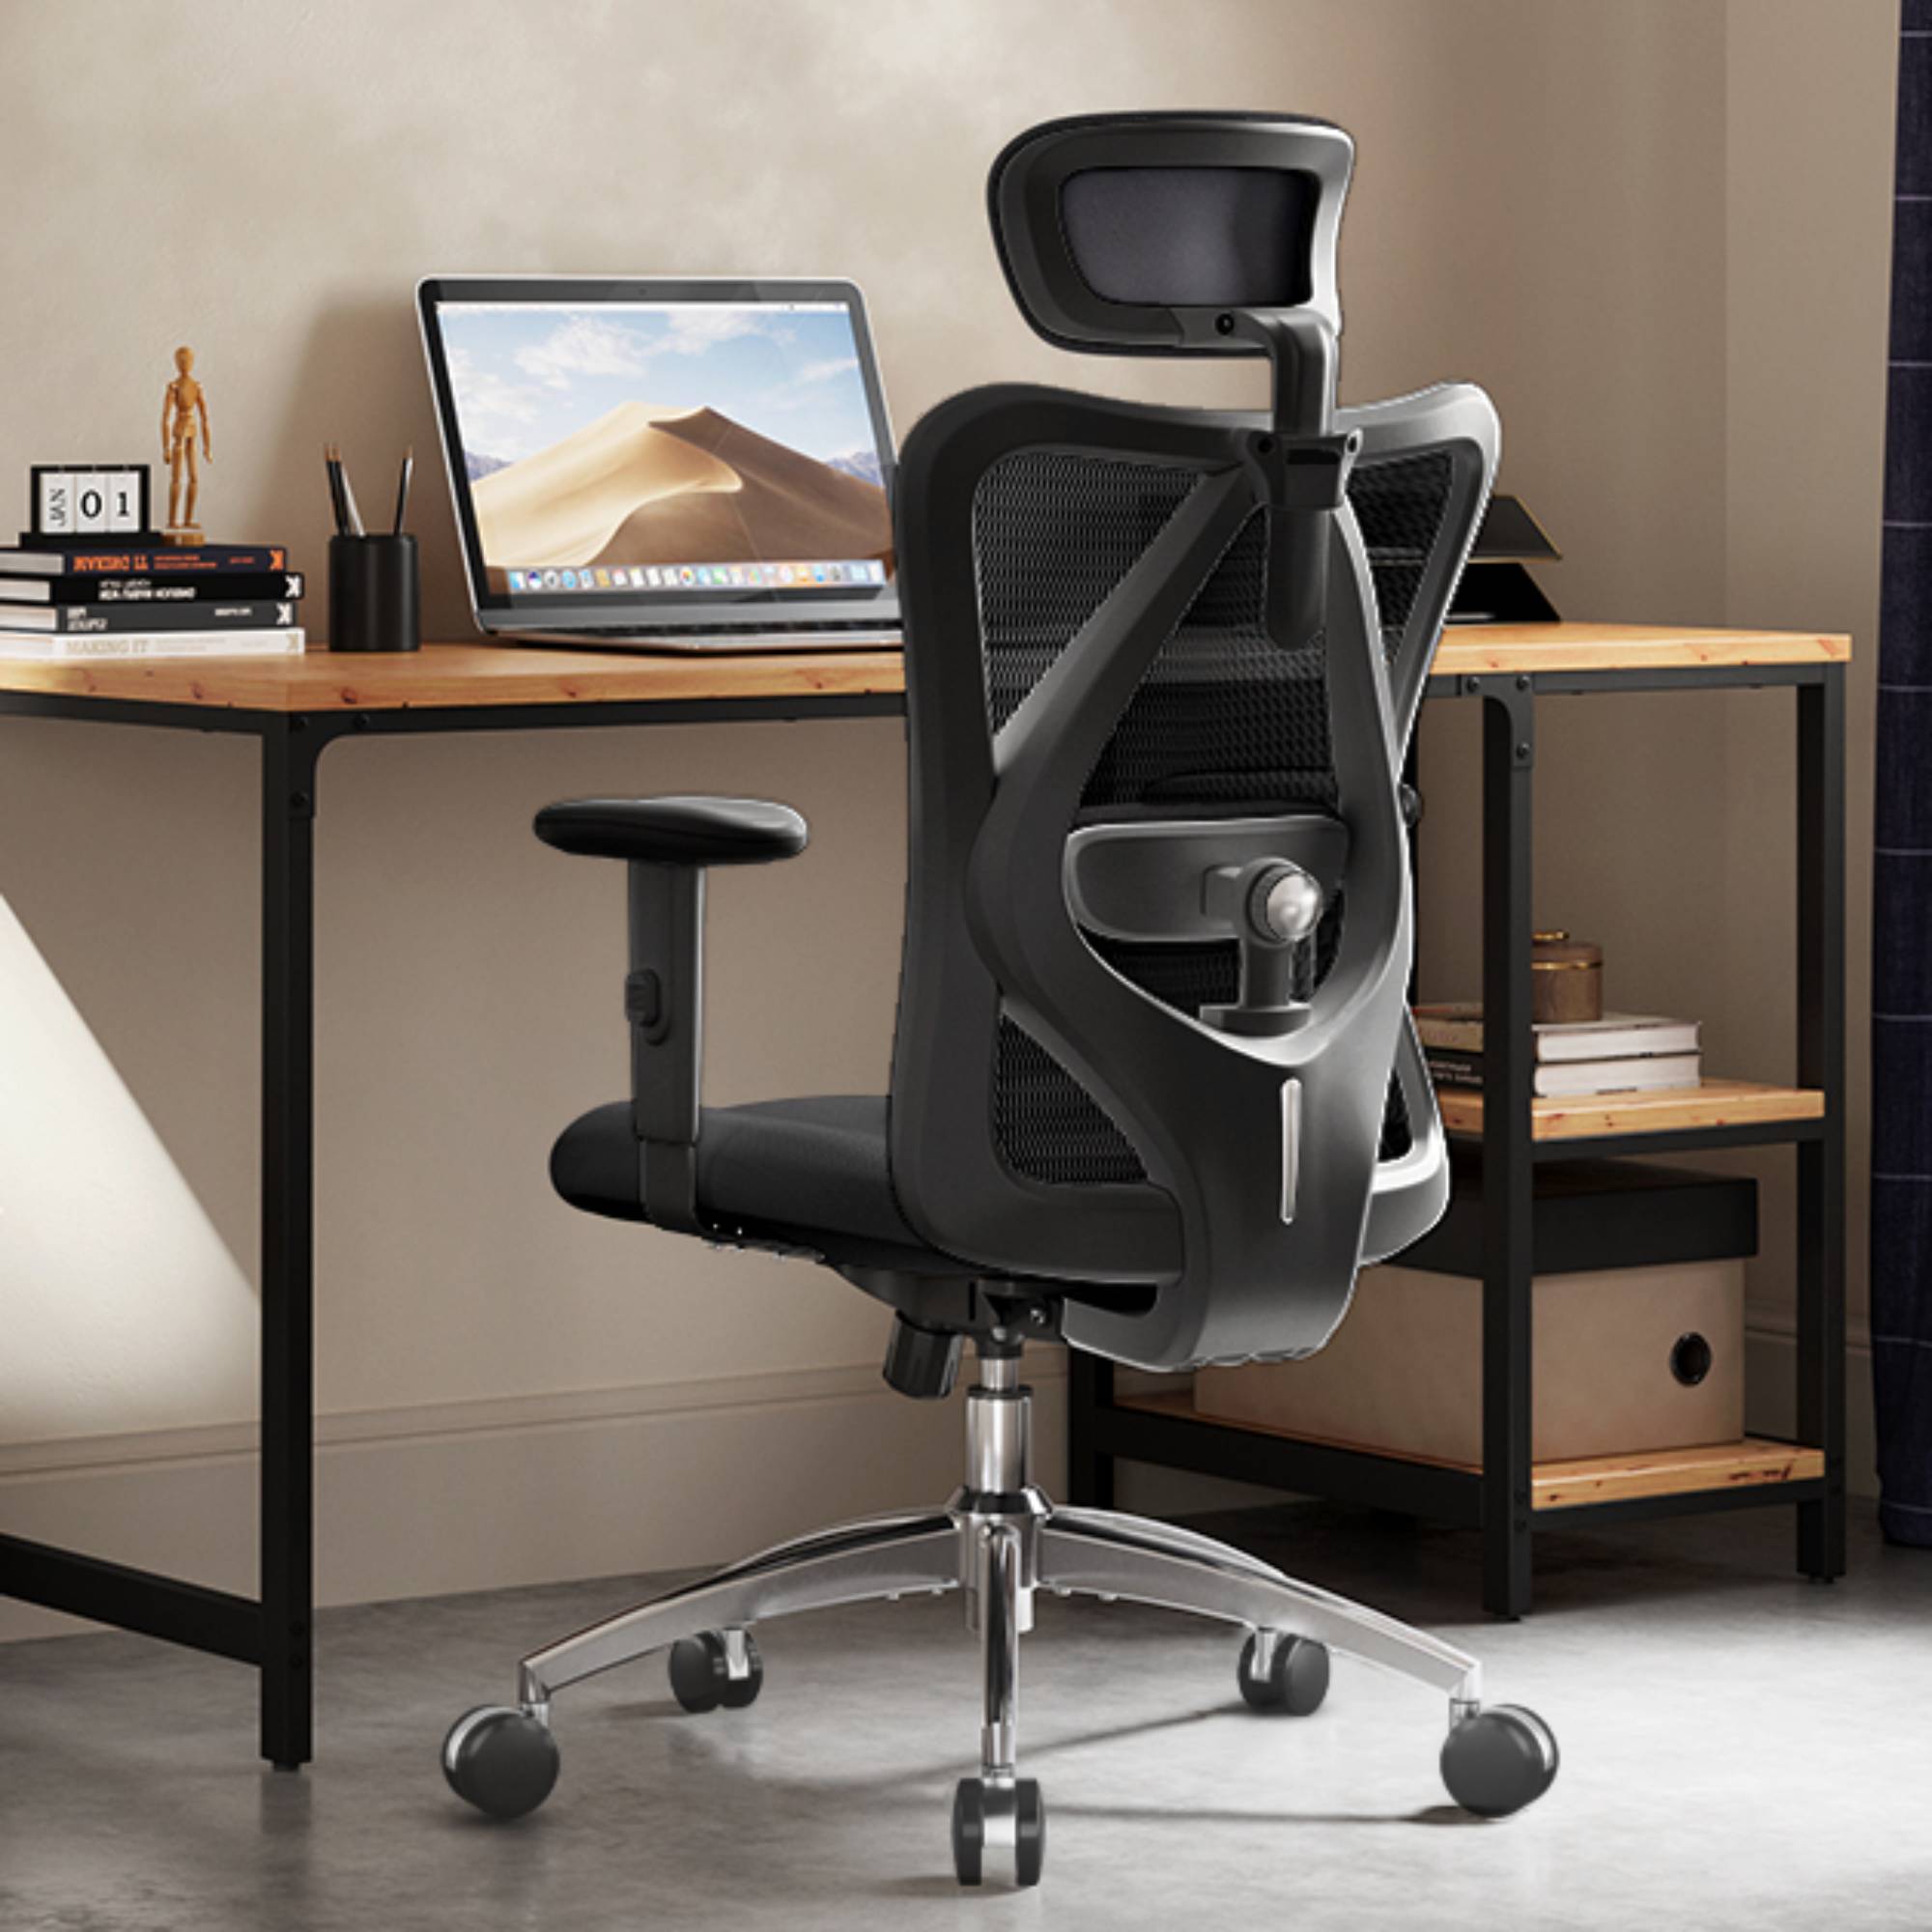 SIHOO Ergonomic Office Chair, Mesh Computer Desk Chair with Adjustable Lumbar Support, High Back chair for big and tall, Black - image 3 of 13